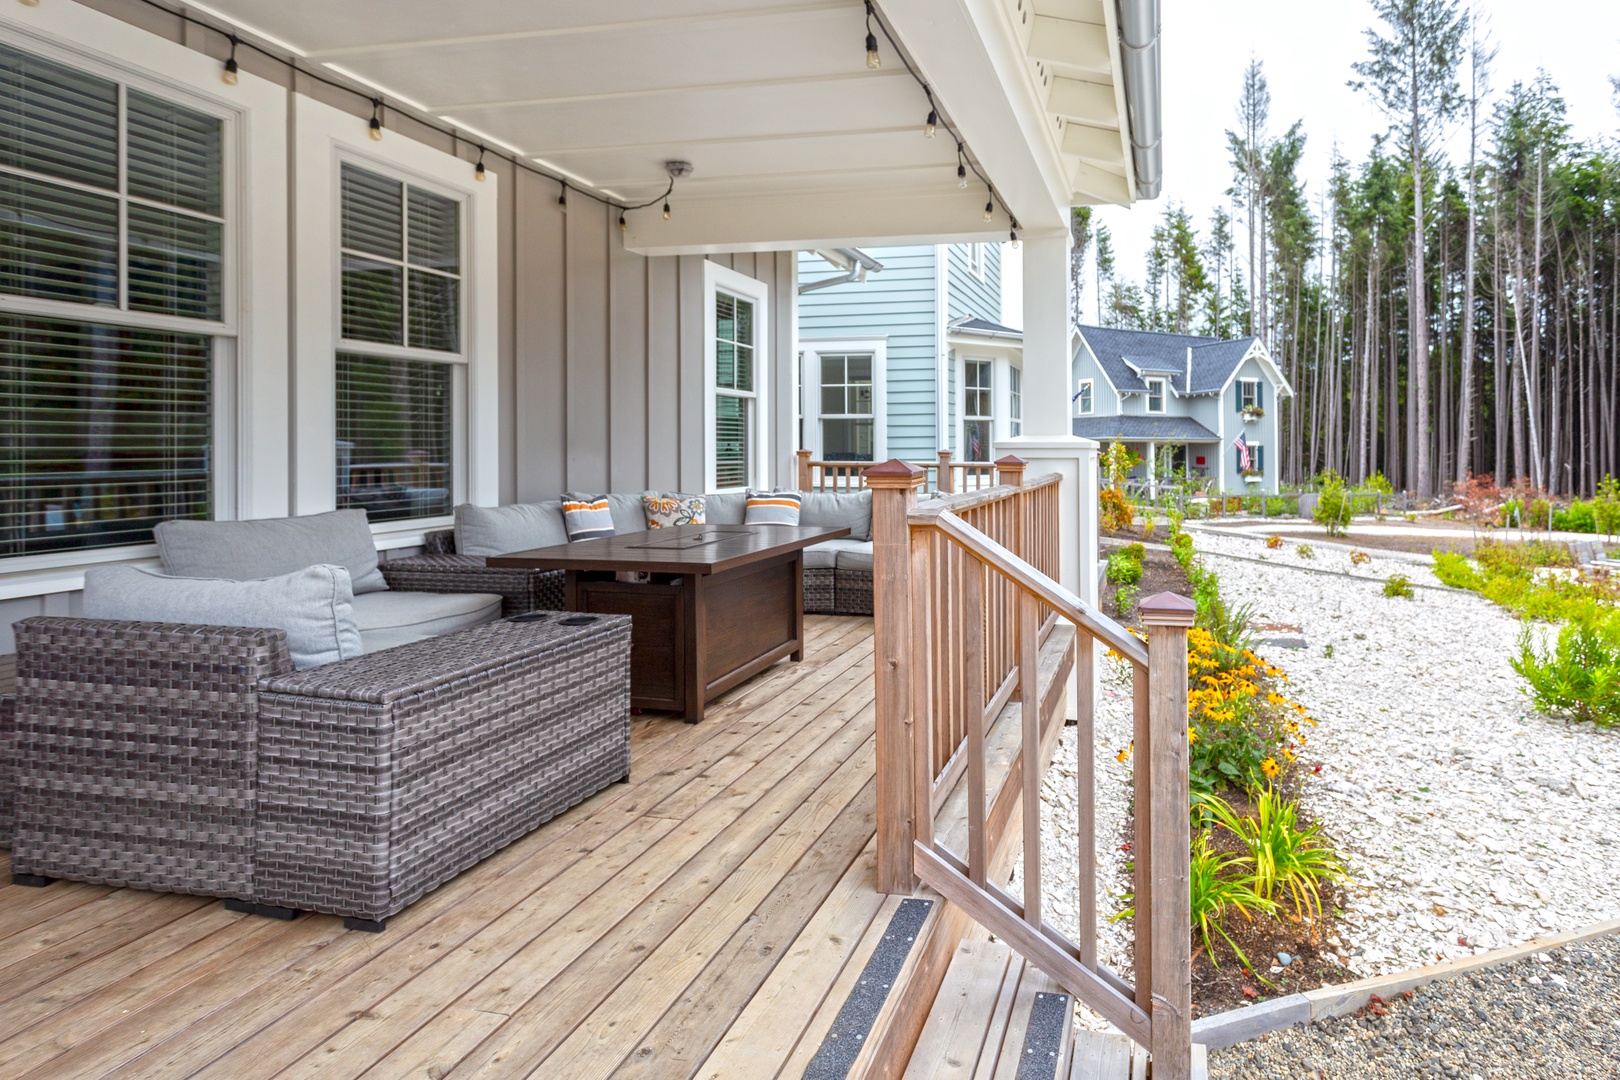 Outdoor seating and grill on porch	